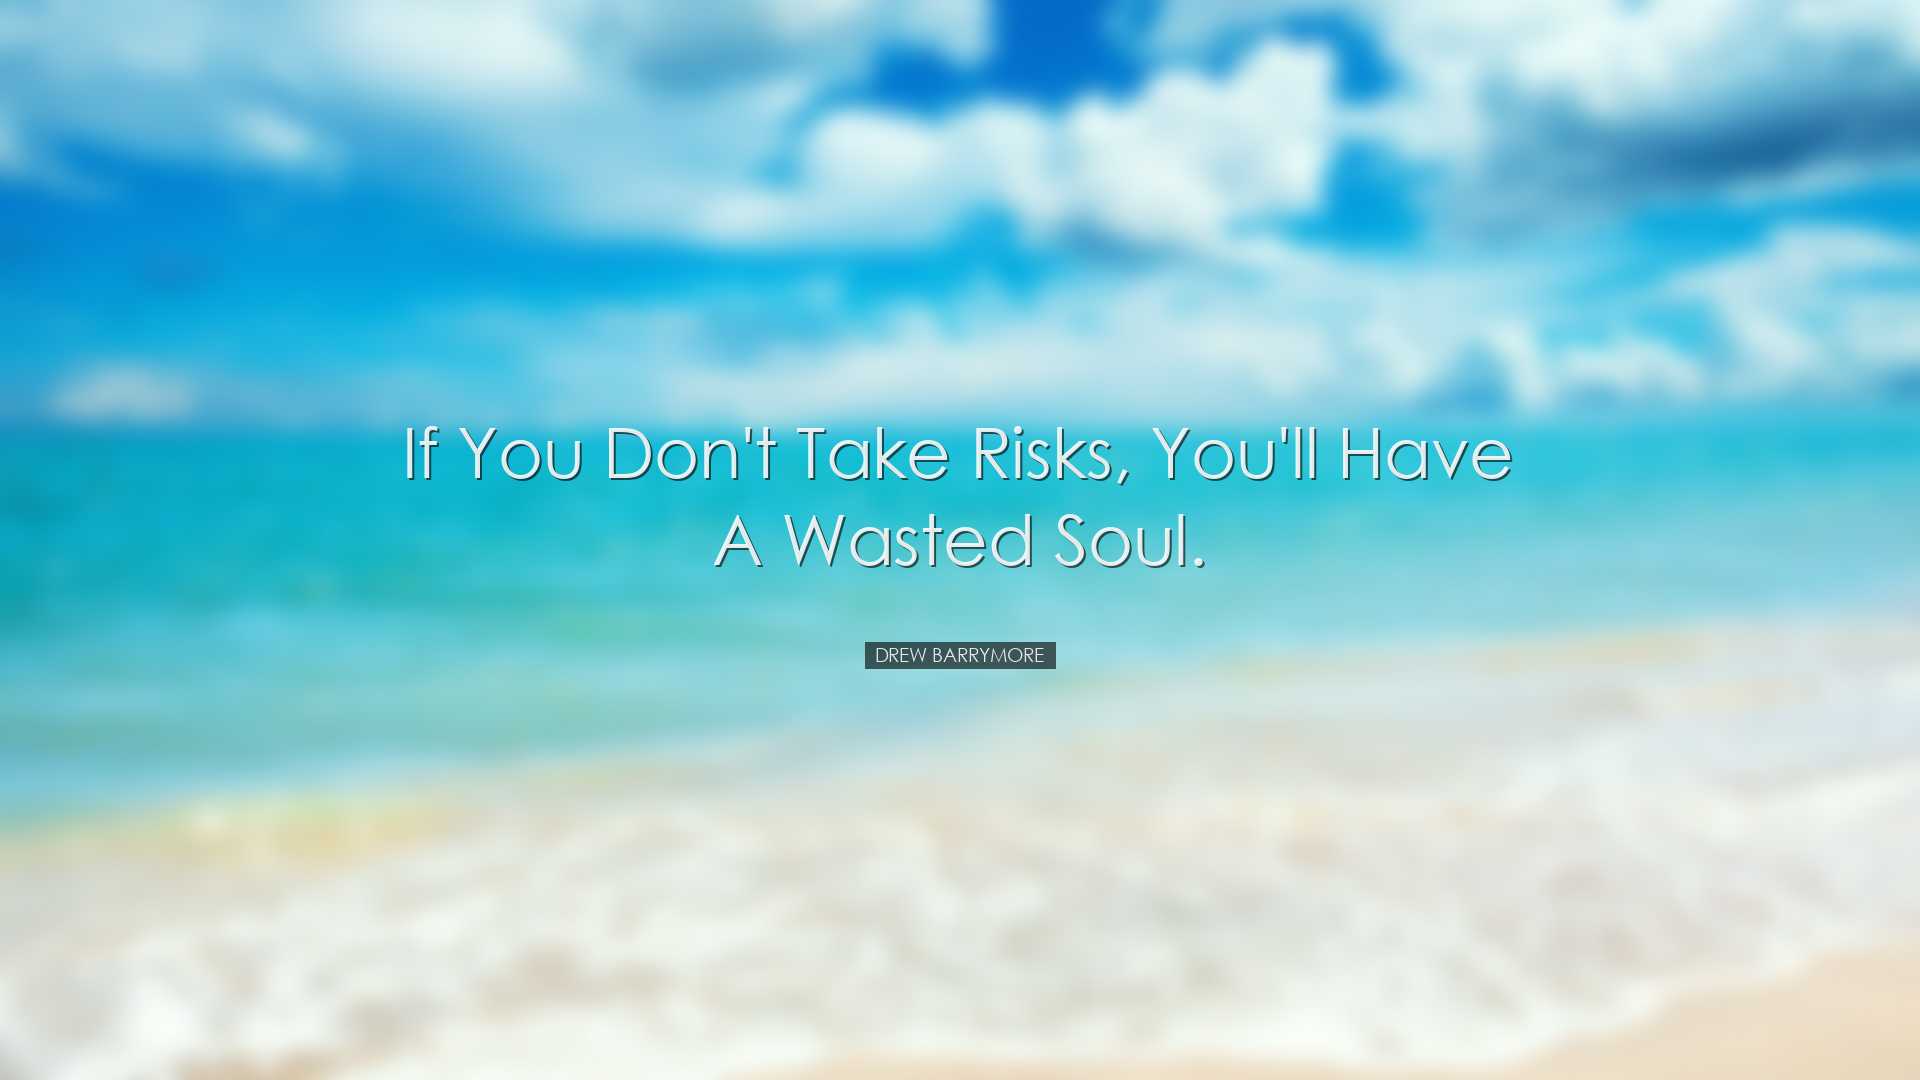 If you don't take risks, you'll have a wasted soul. - Drew Barrymo